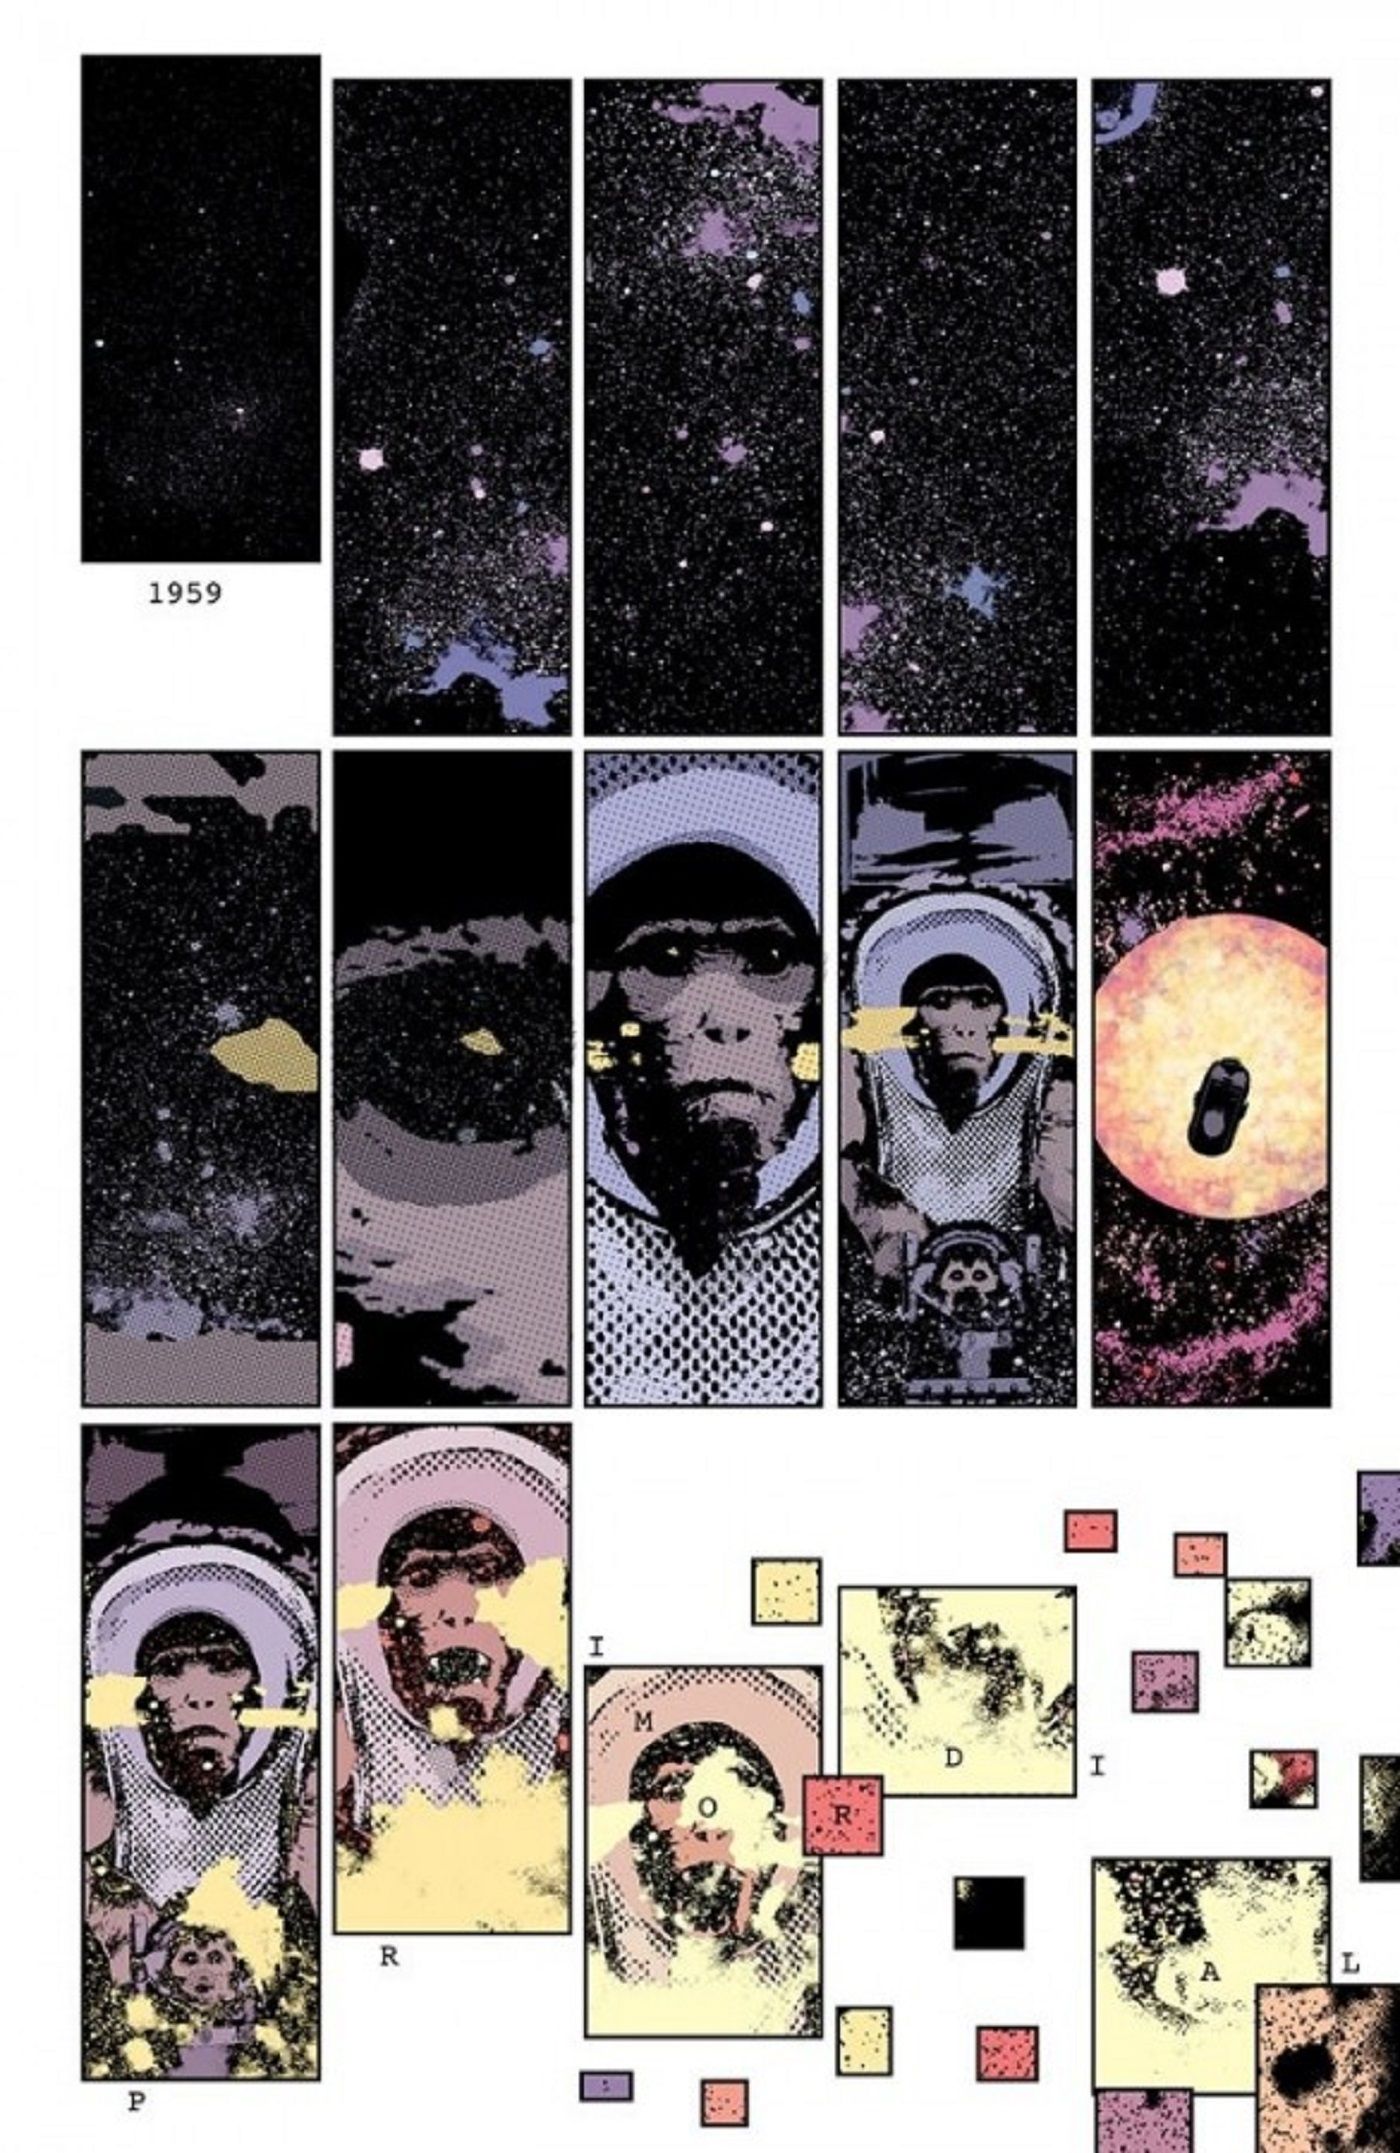 Lemire & Sorrentinos Primordial is 2001 A Space Odyssey Meets We3